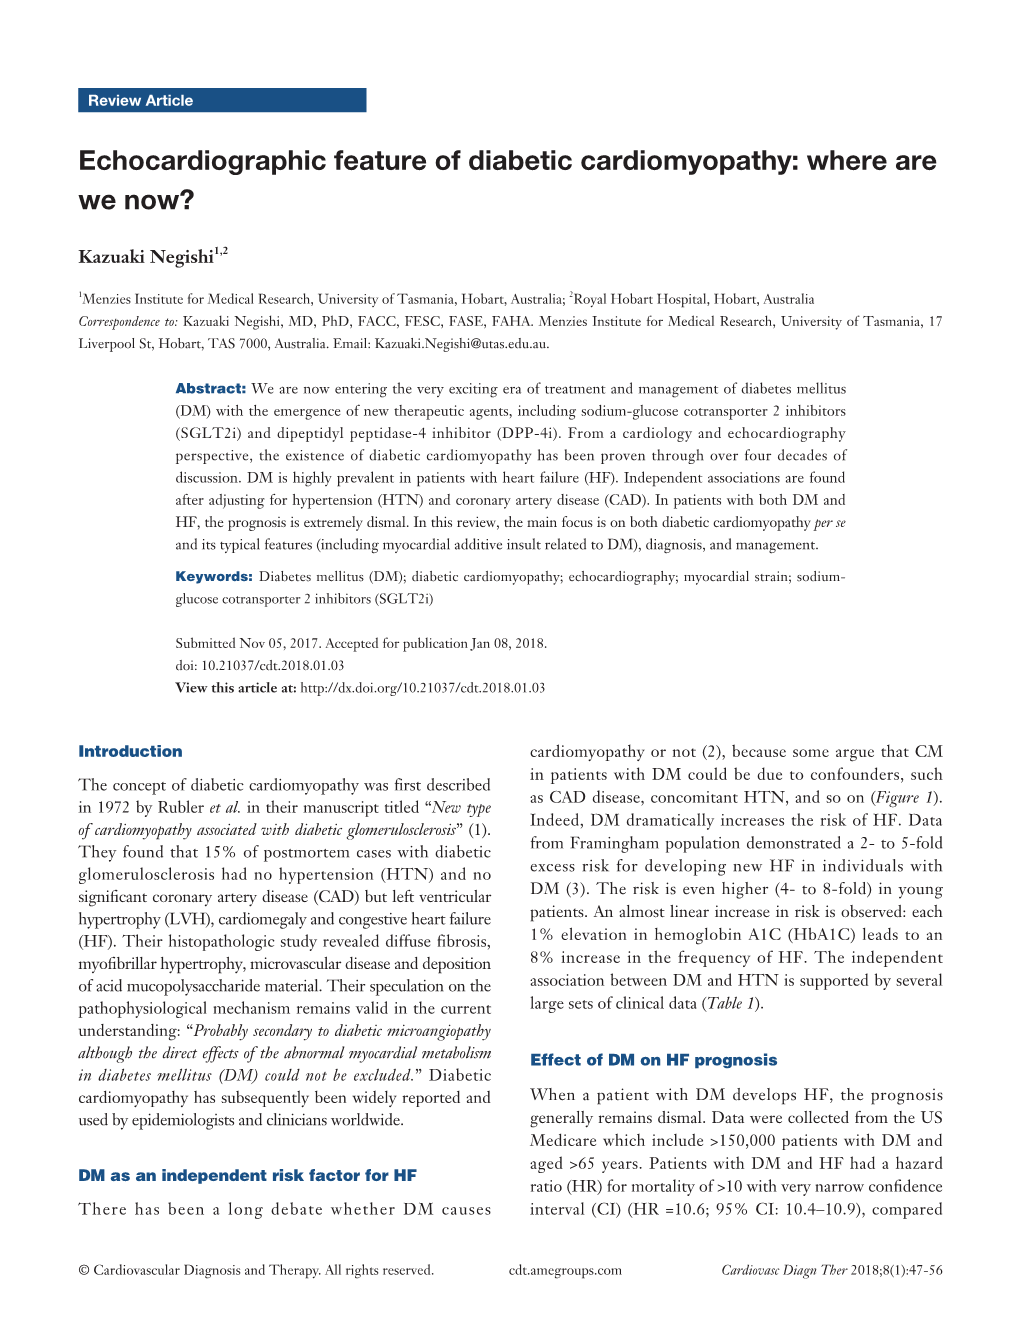 Echocardiographic Feature of Diabetic Cardiomyopathy: Where Are We Now?